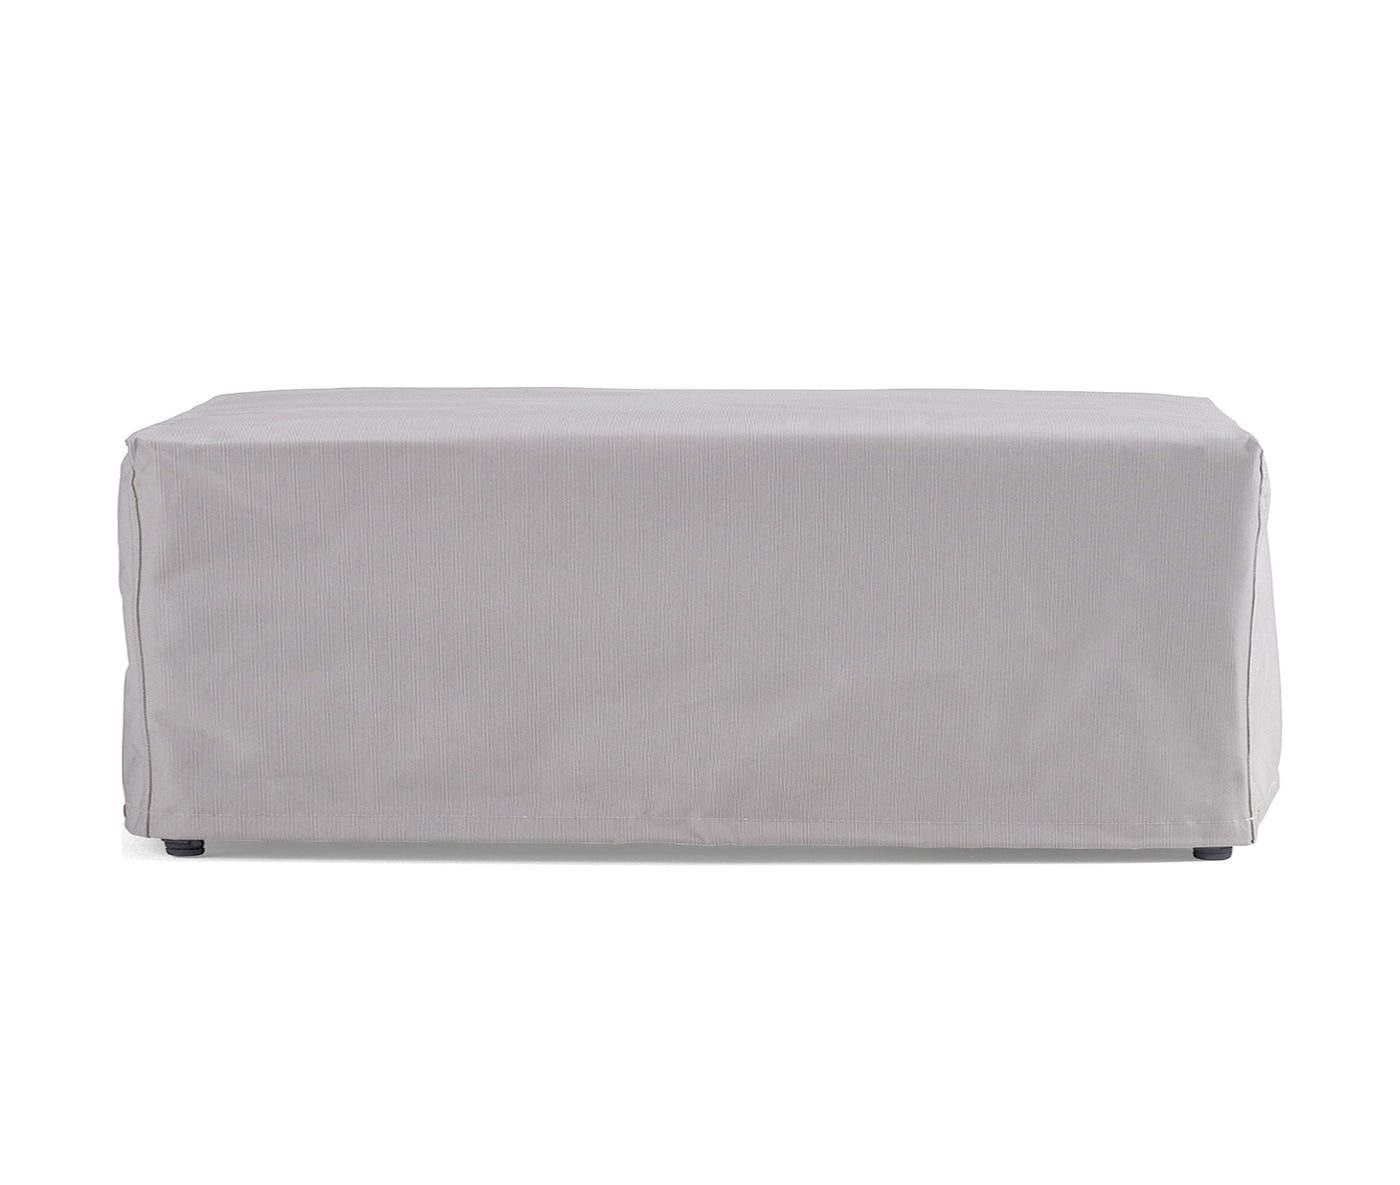 Fire Table Covers